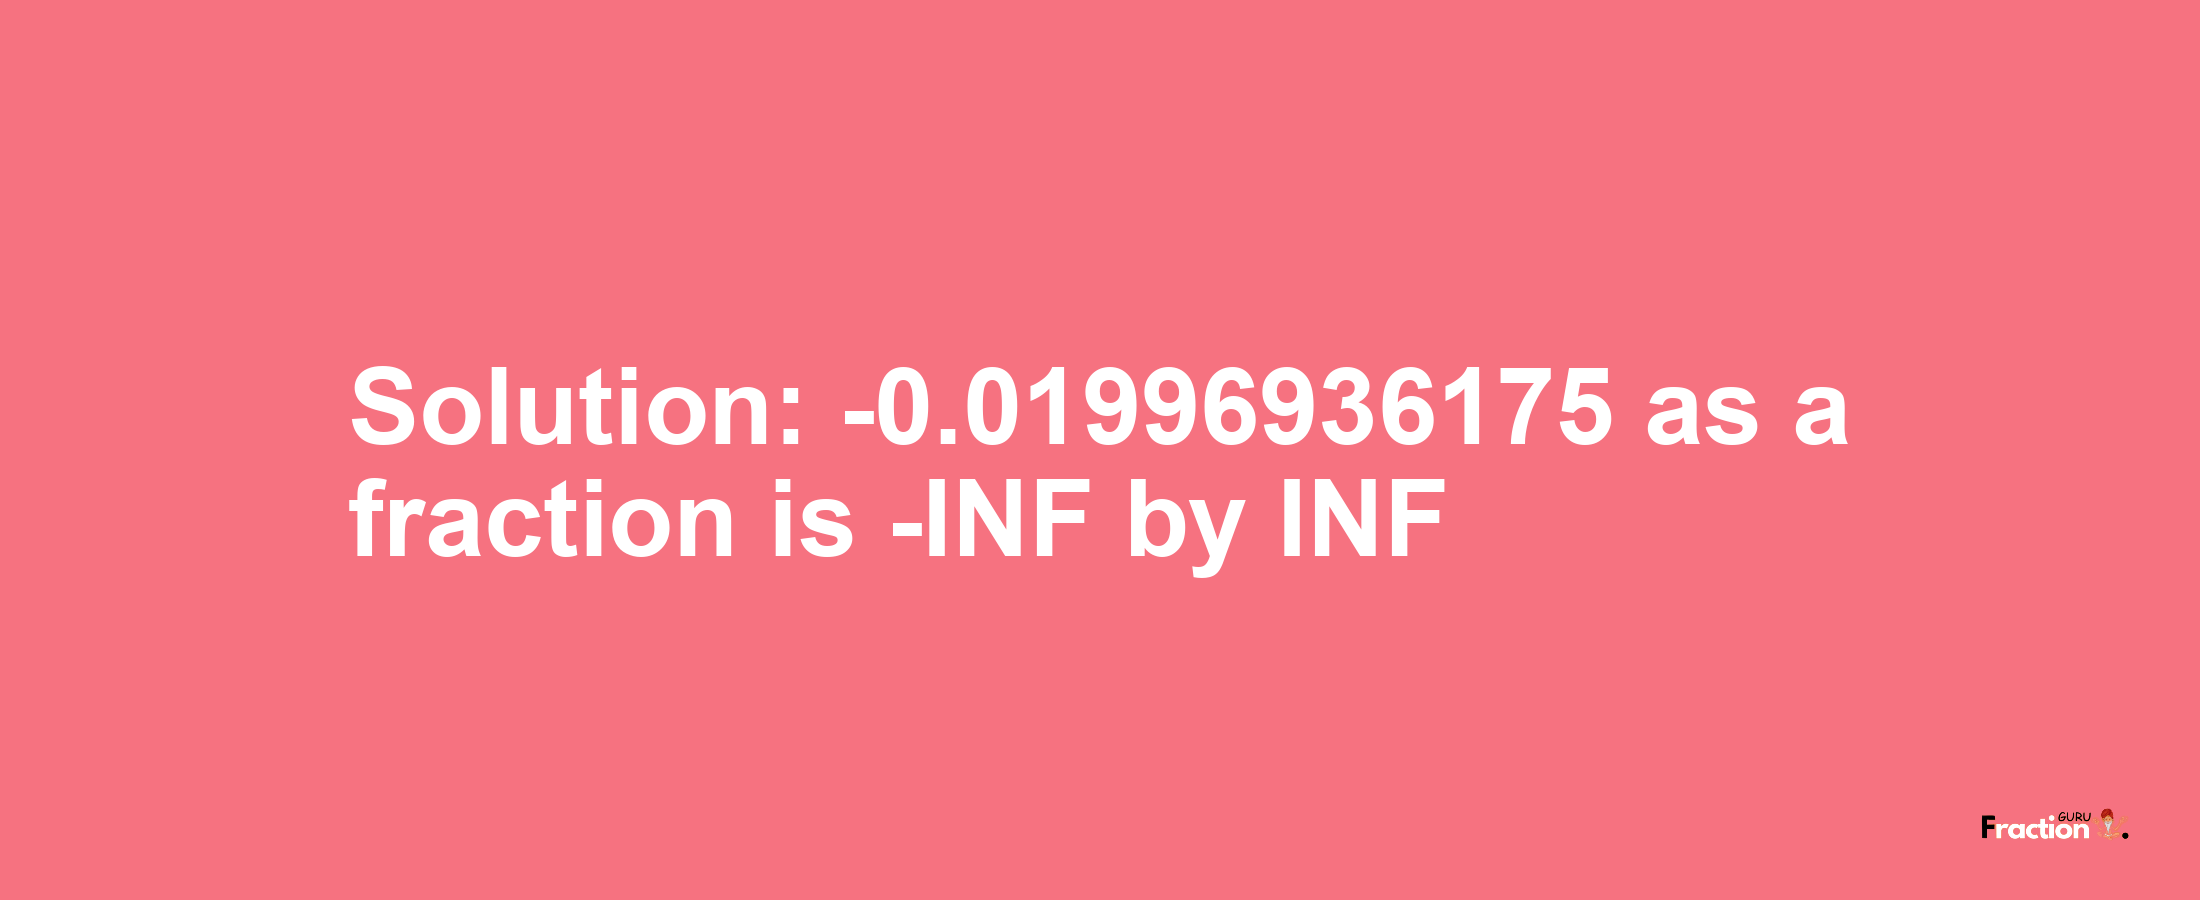 Solution:-0.01996936175 as a fraction is -INF/INF